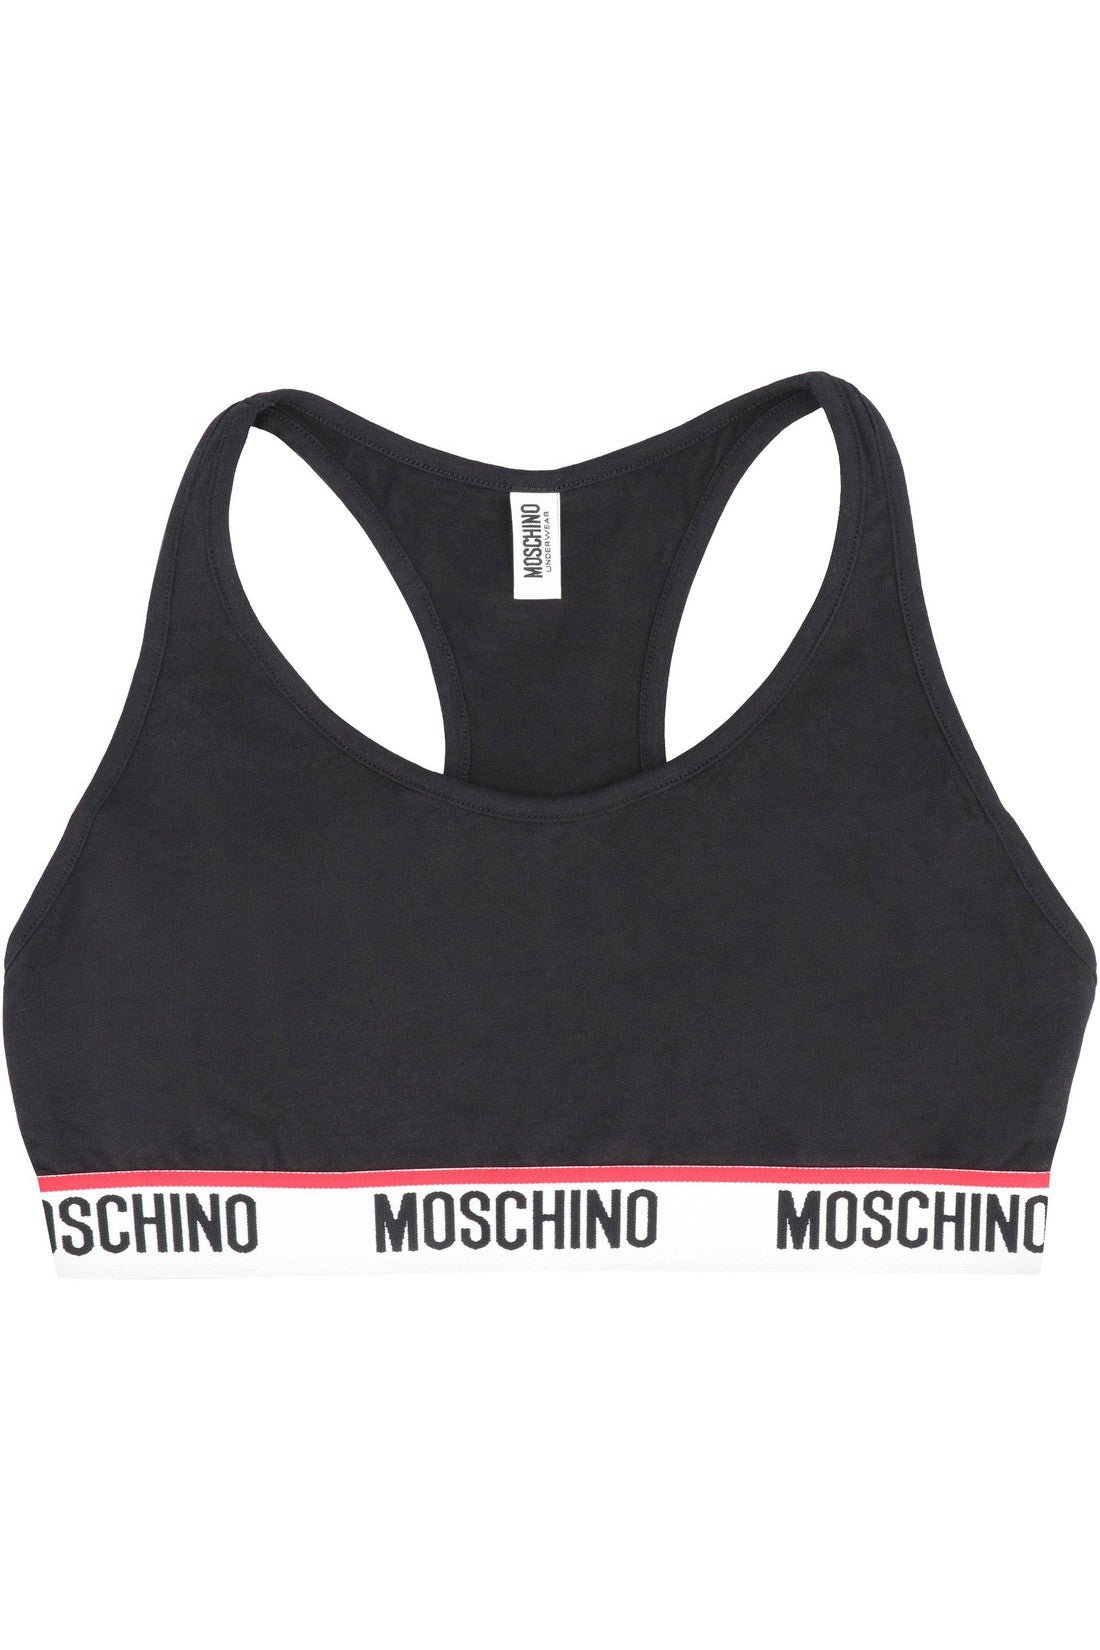 Moschino-OUTLET-SALE-Logo-band bra top-ARCHIVIST